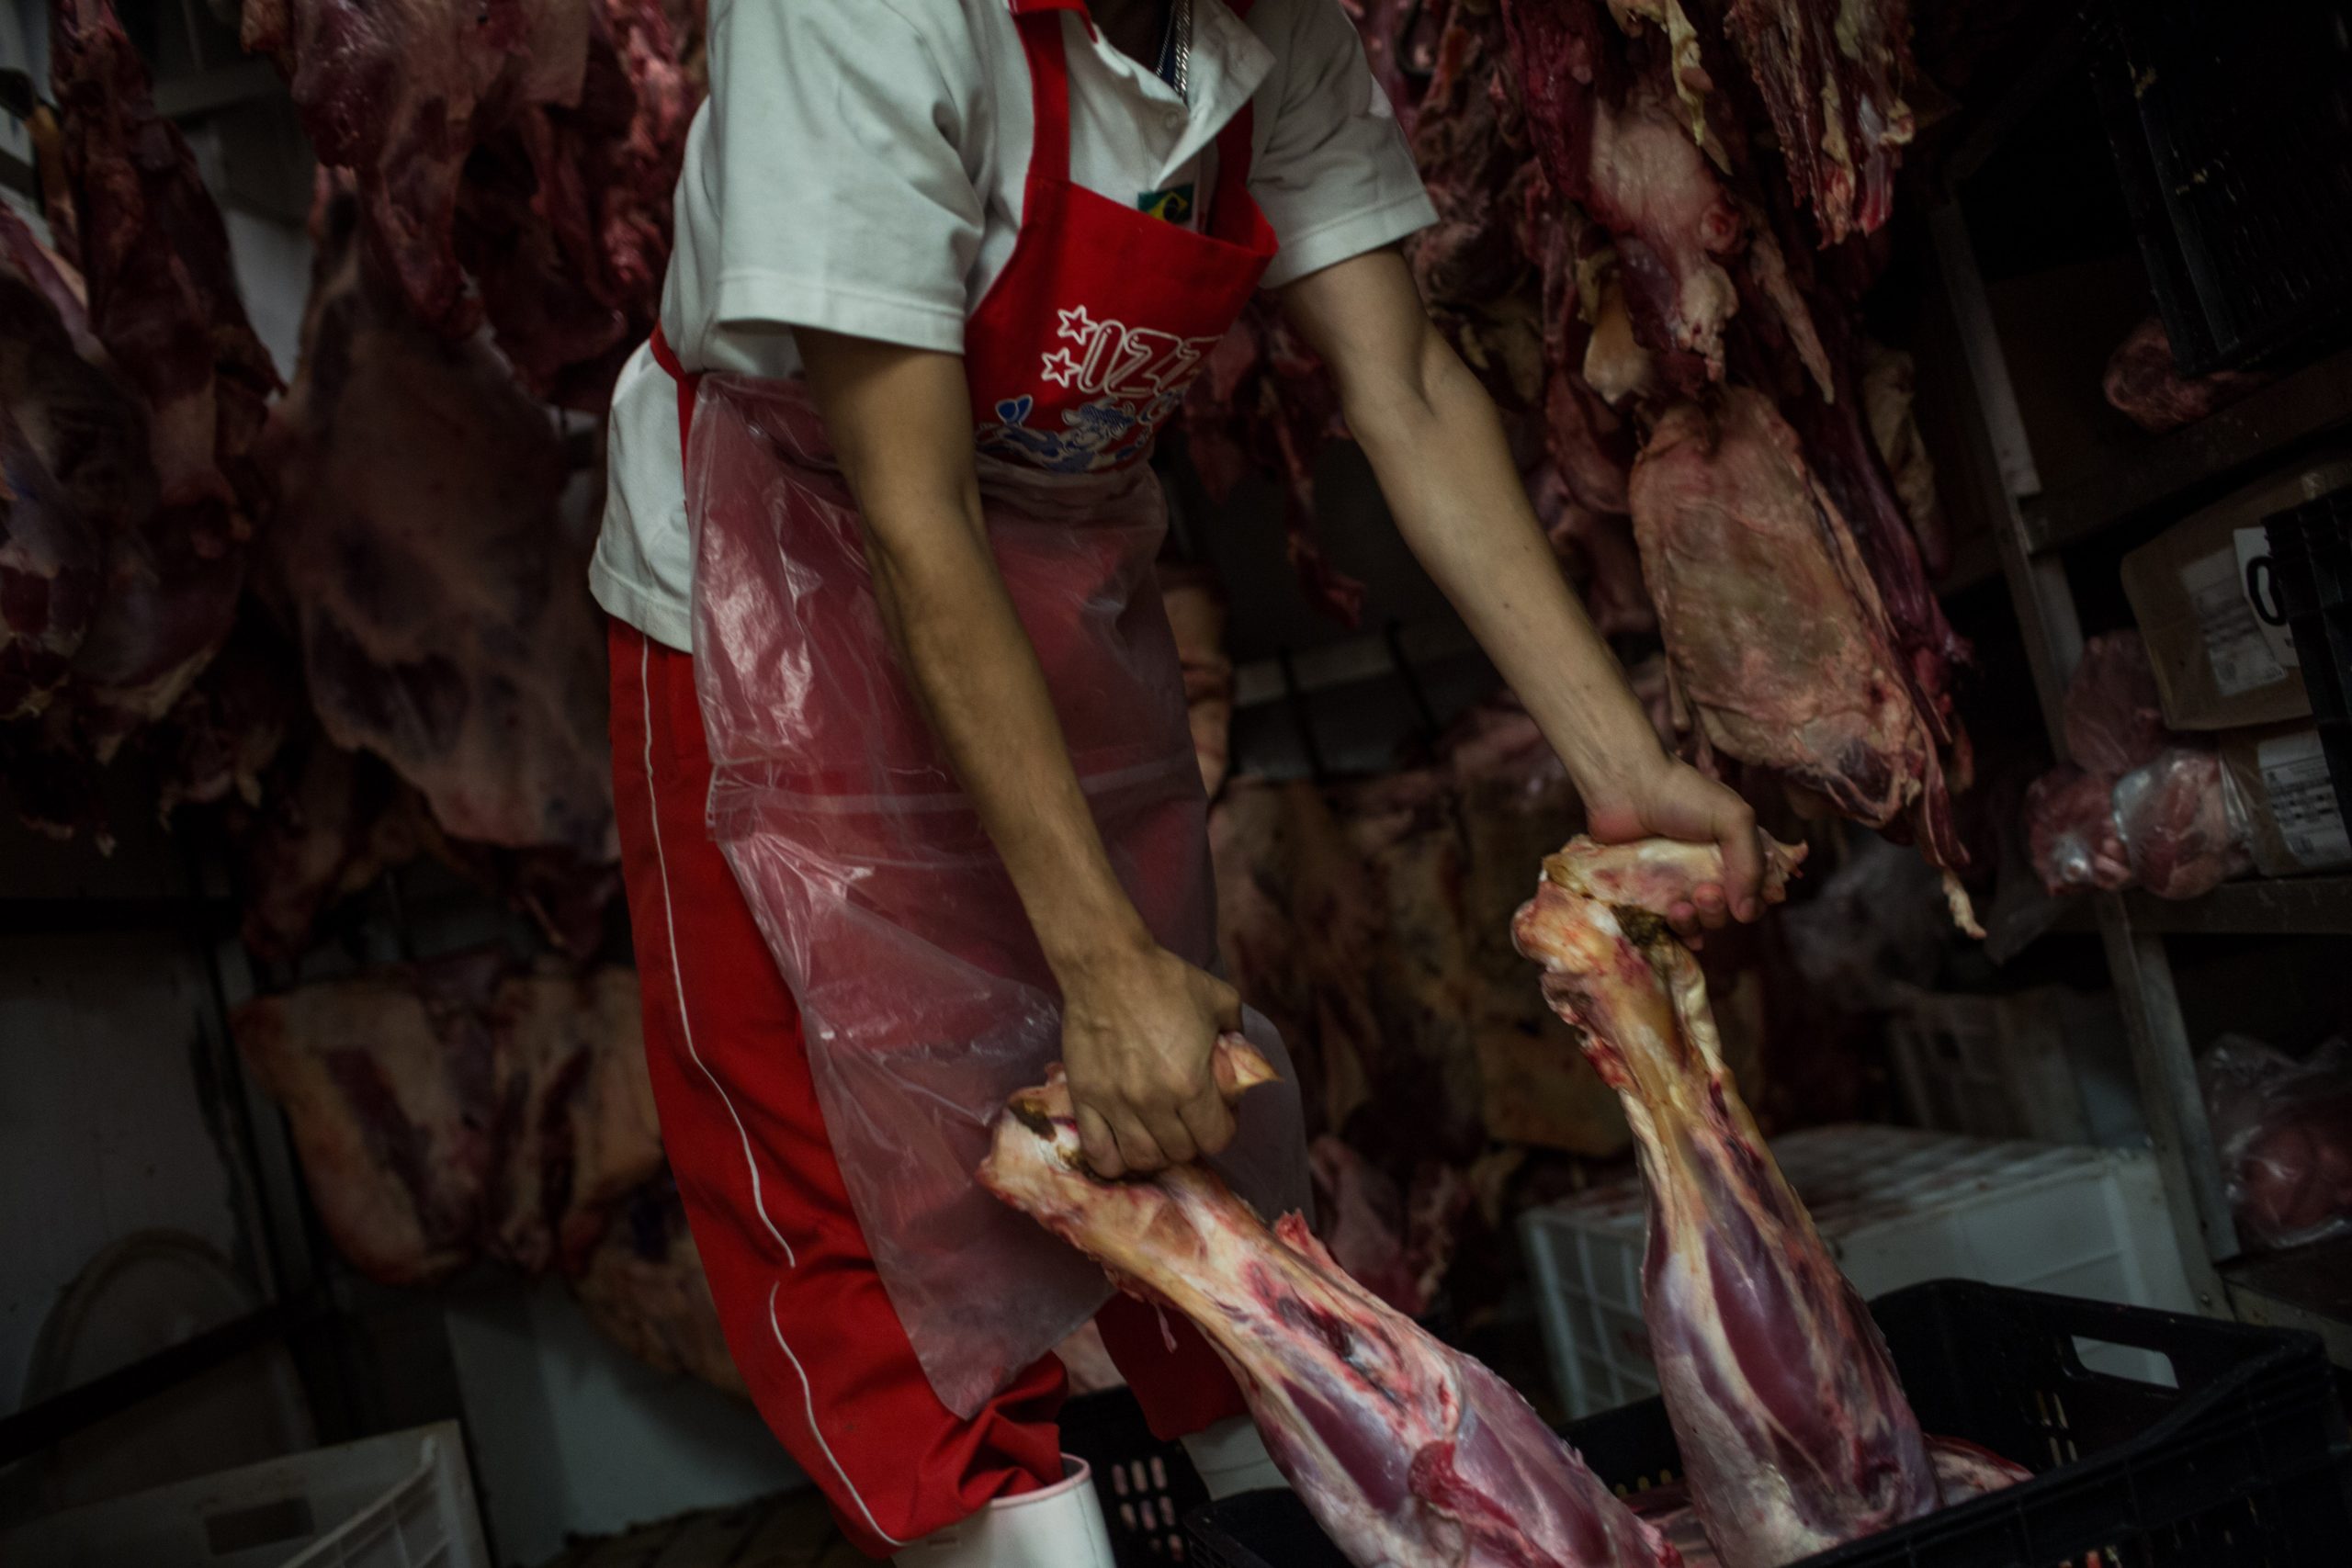 Butchers work at the popular Lapa Market March 20, 2017 in Sao Paulo, Brazil. (Photo: Victor Moriyama/, Getty Images)